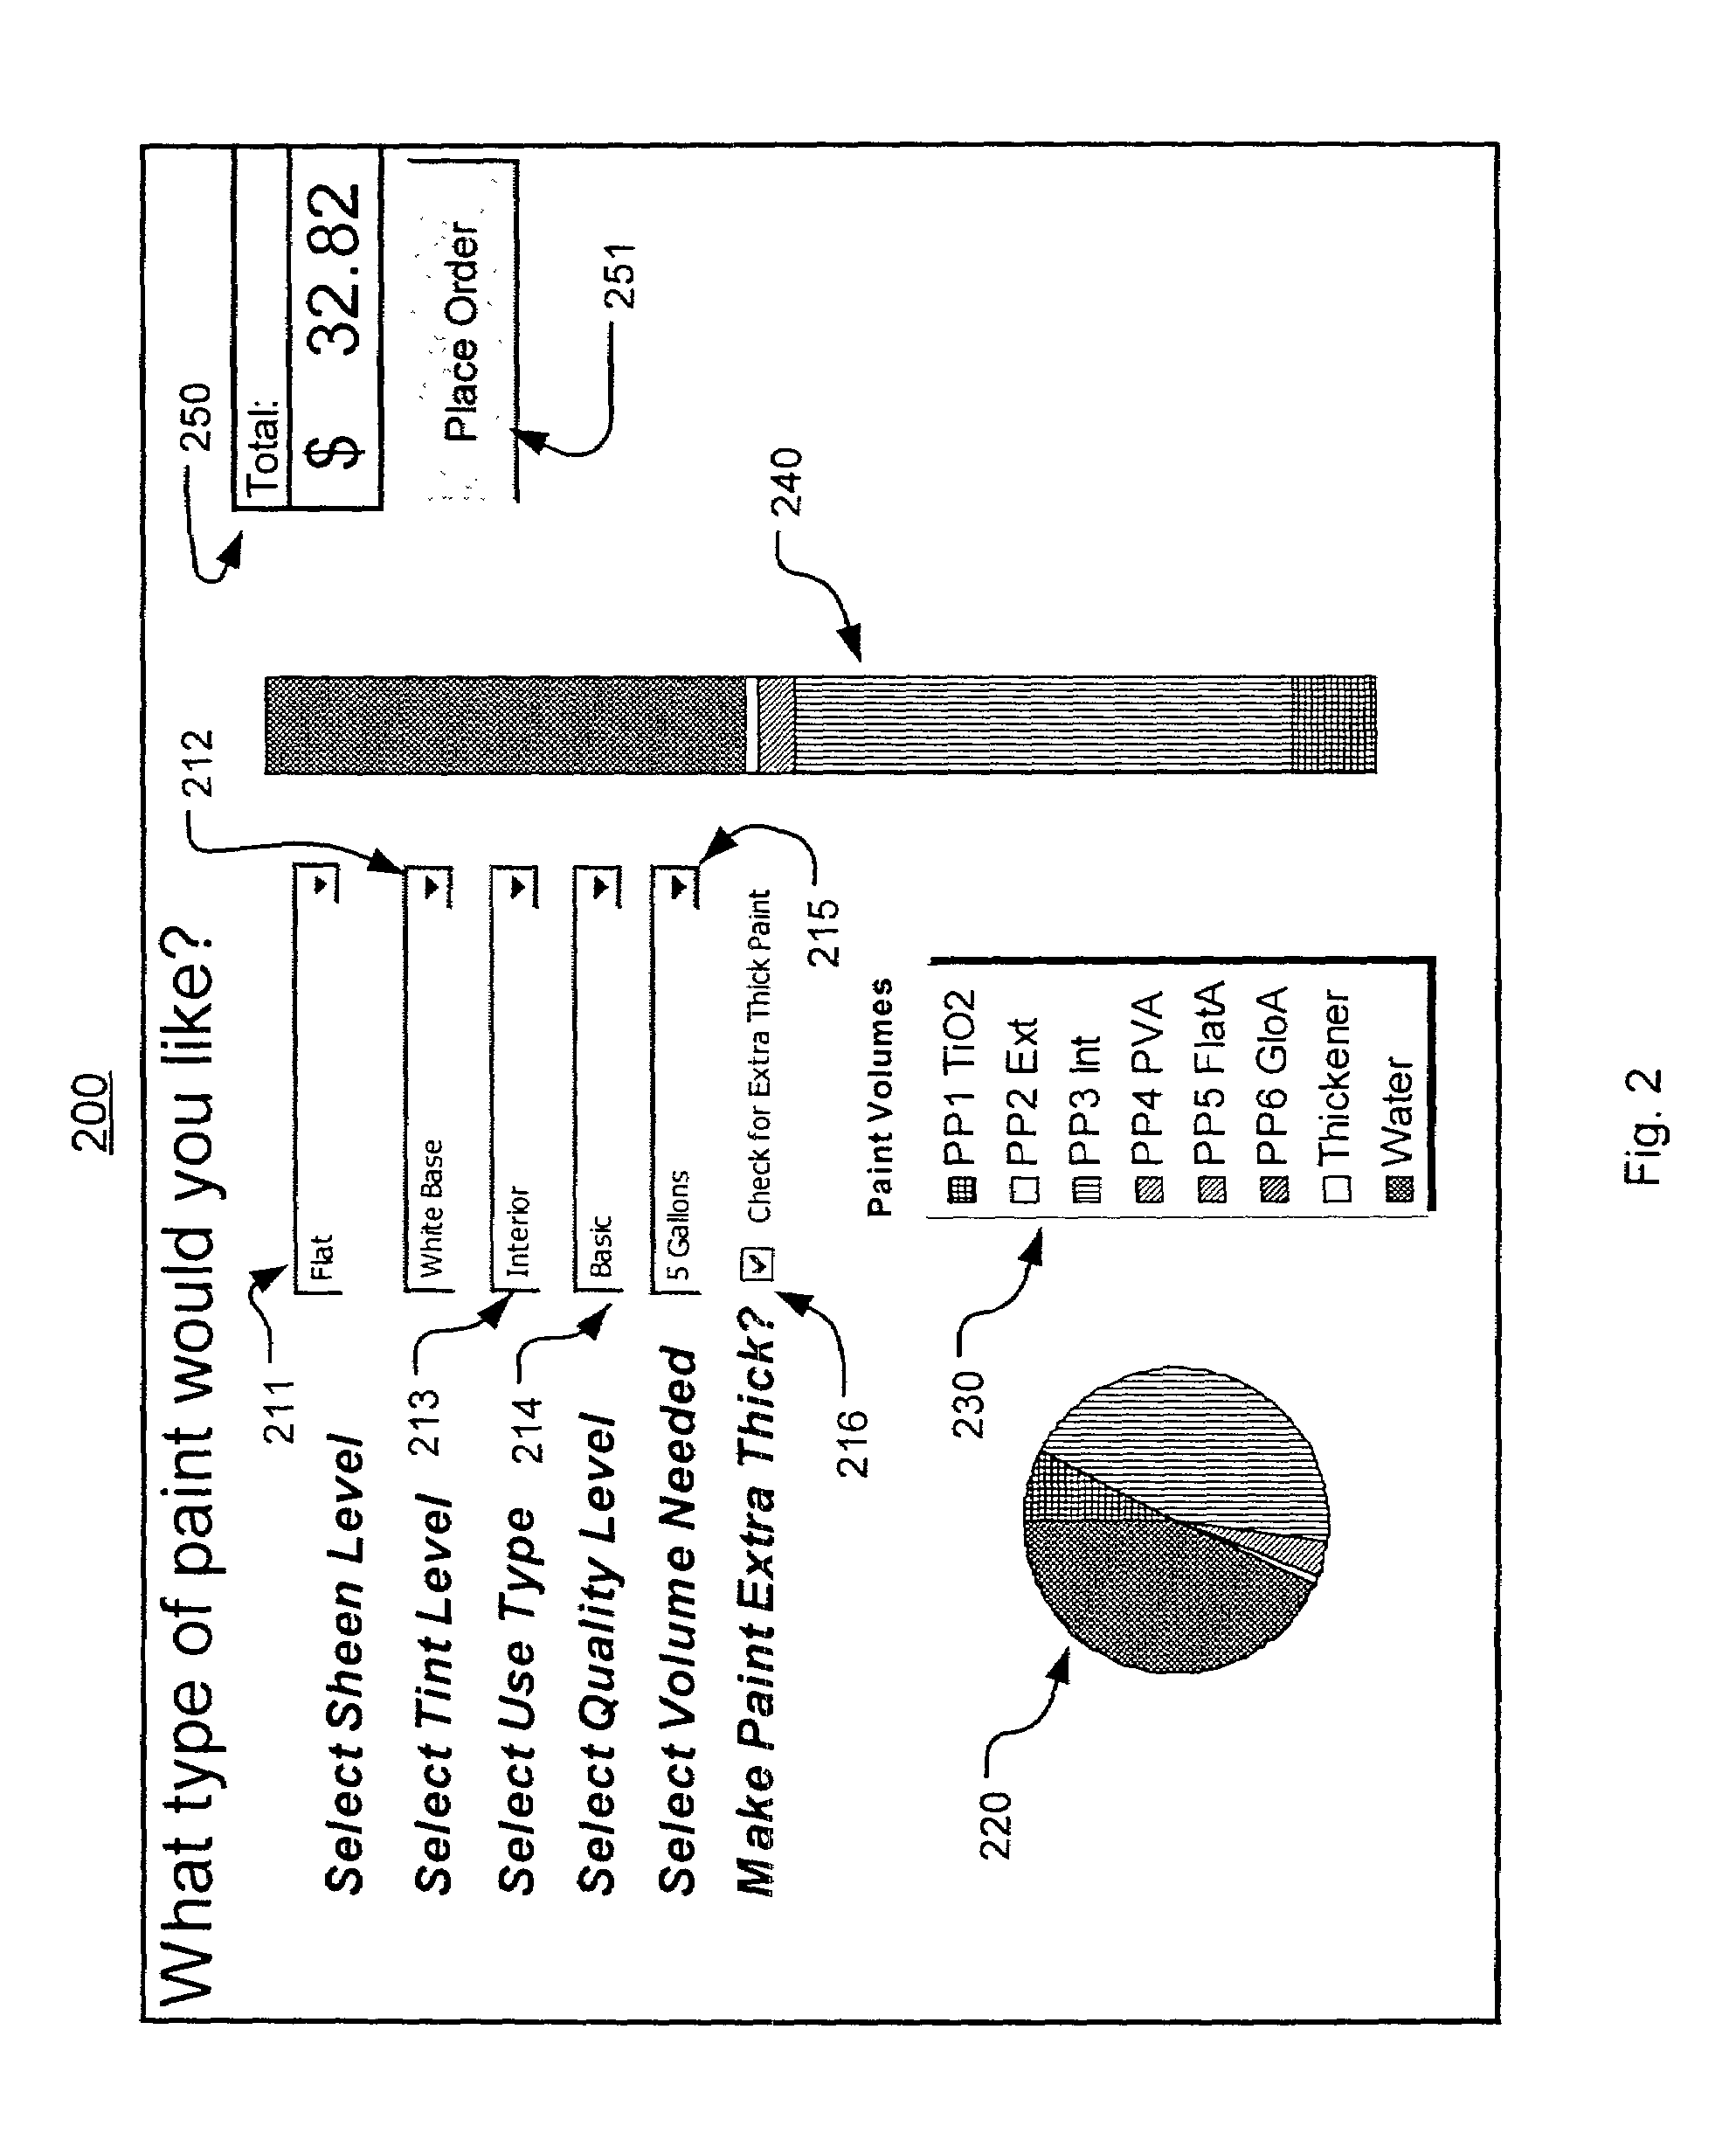 Distributed paint manufacturing system